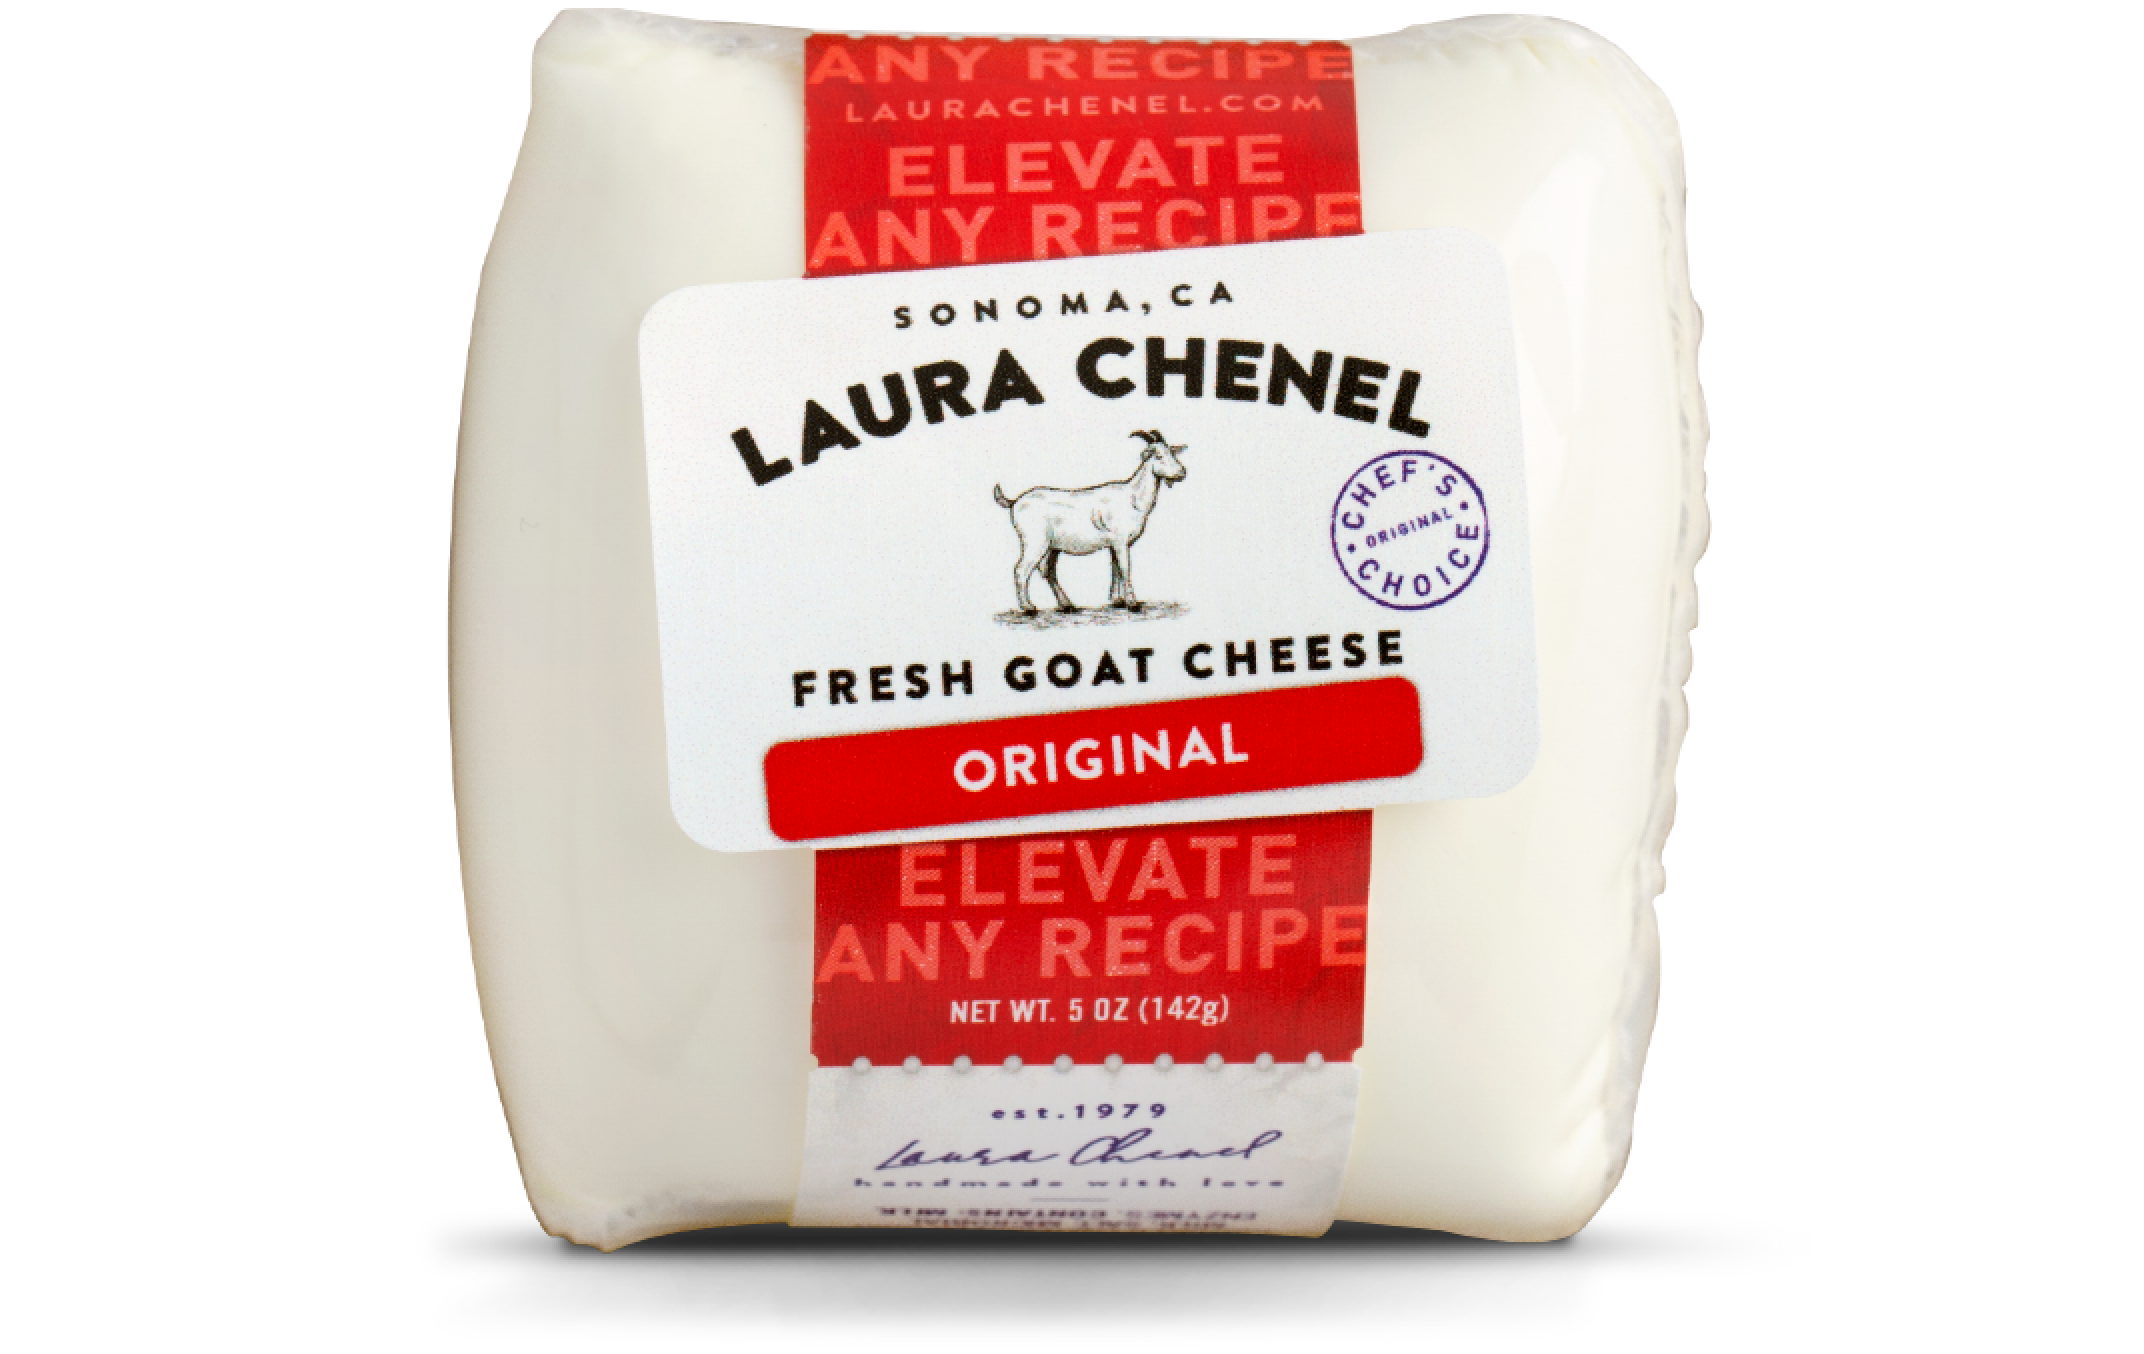 LC Come Together Product Fresh Goat Cheese 1072x677 2x